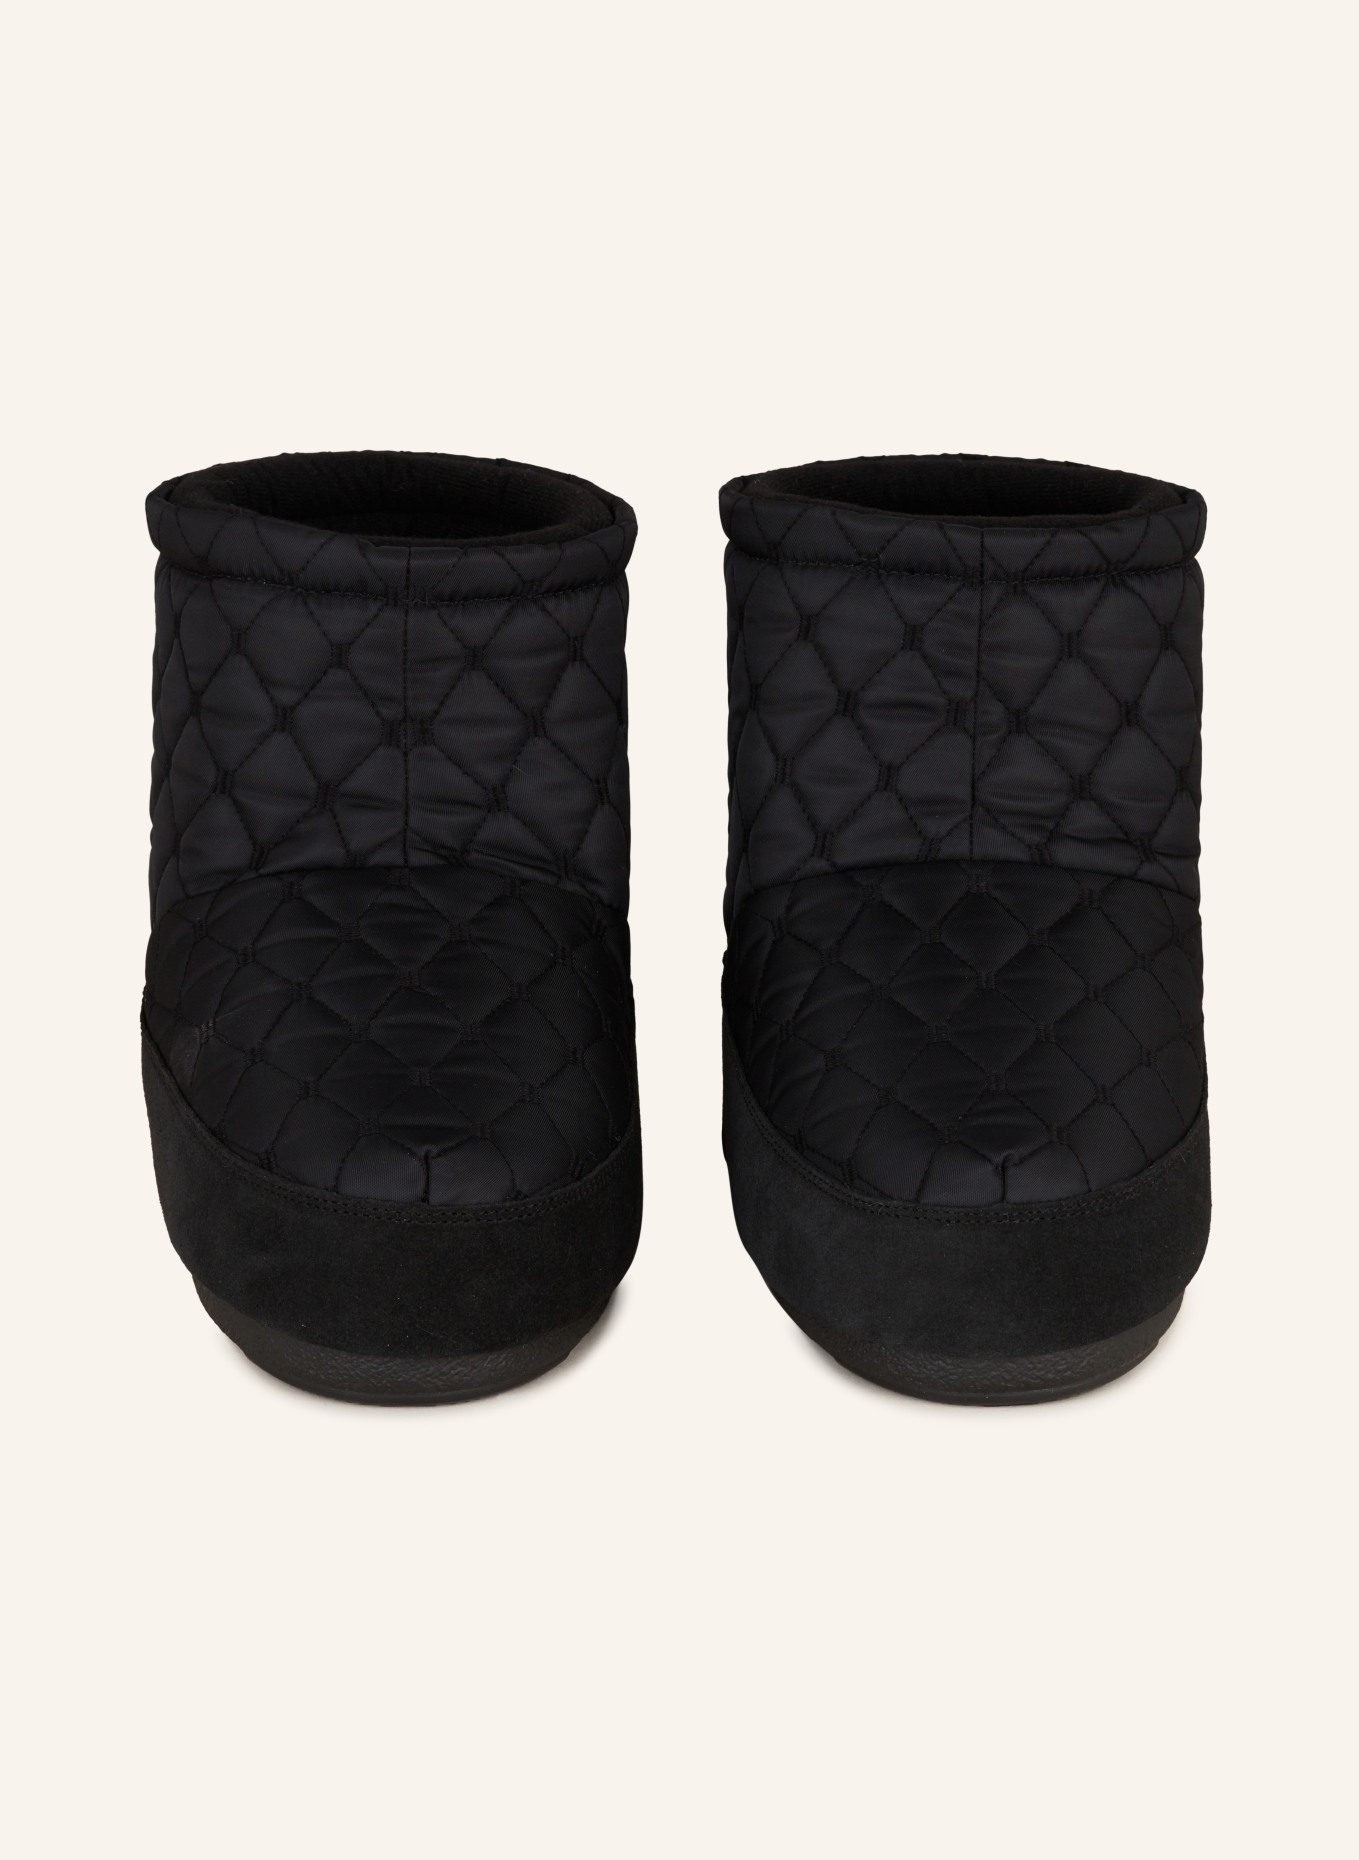 MOON BOOT Moon Boots ICON LOW NOLACE QUILTED, Farbe: SCHWARZ (Bild 3)